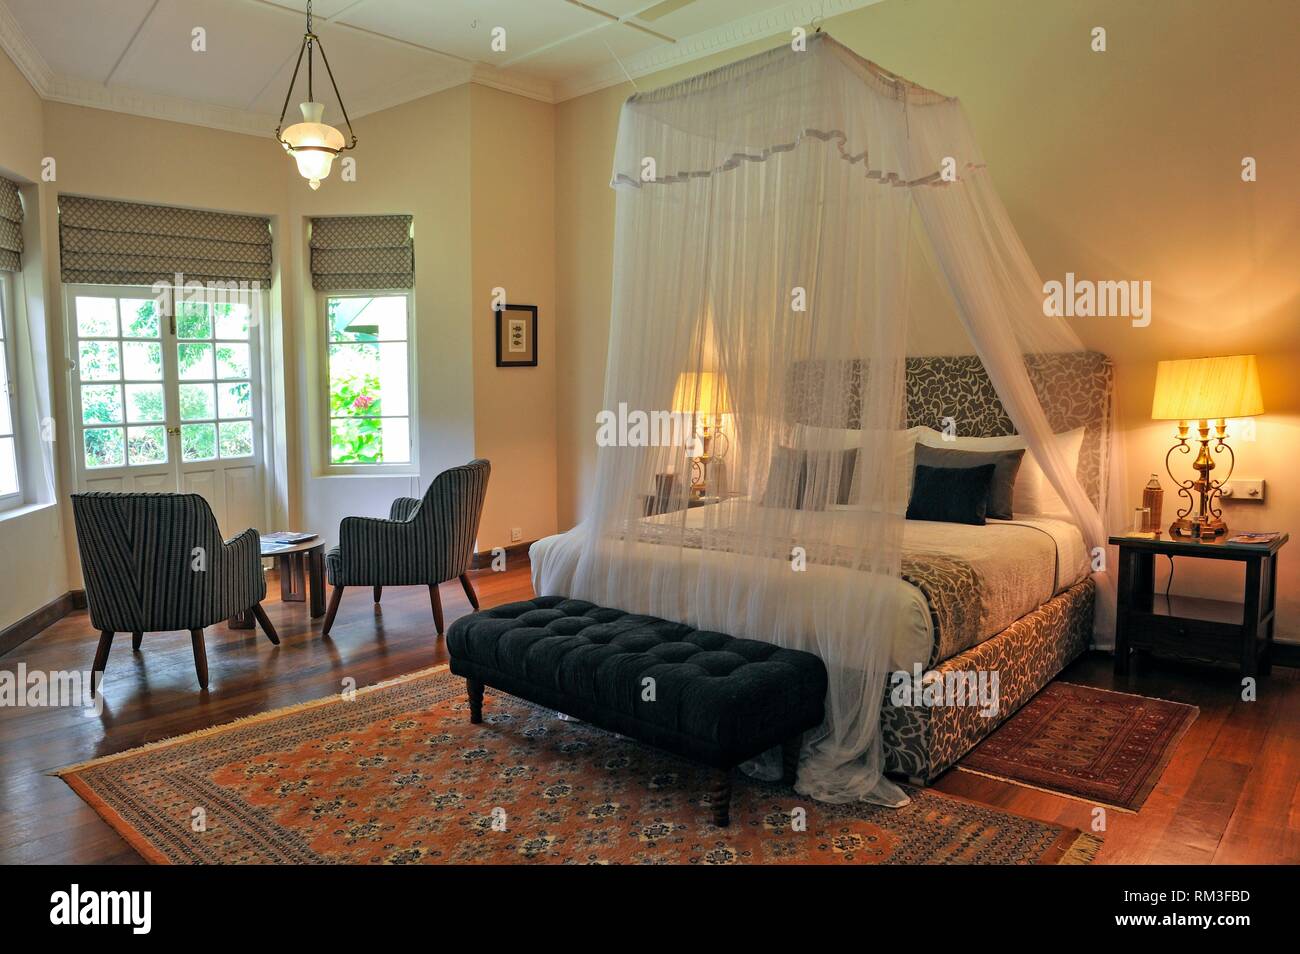 bedroom of the Summerville Bungalow of the luxury Ceylon Tea Trails resort, Sri Lanka, Indian subcontinent, South Asia. Stock Photo